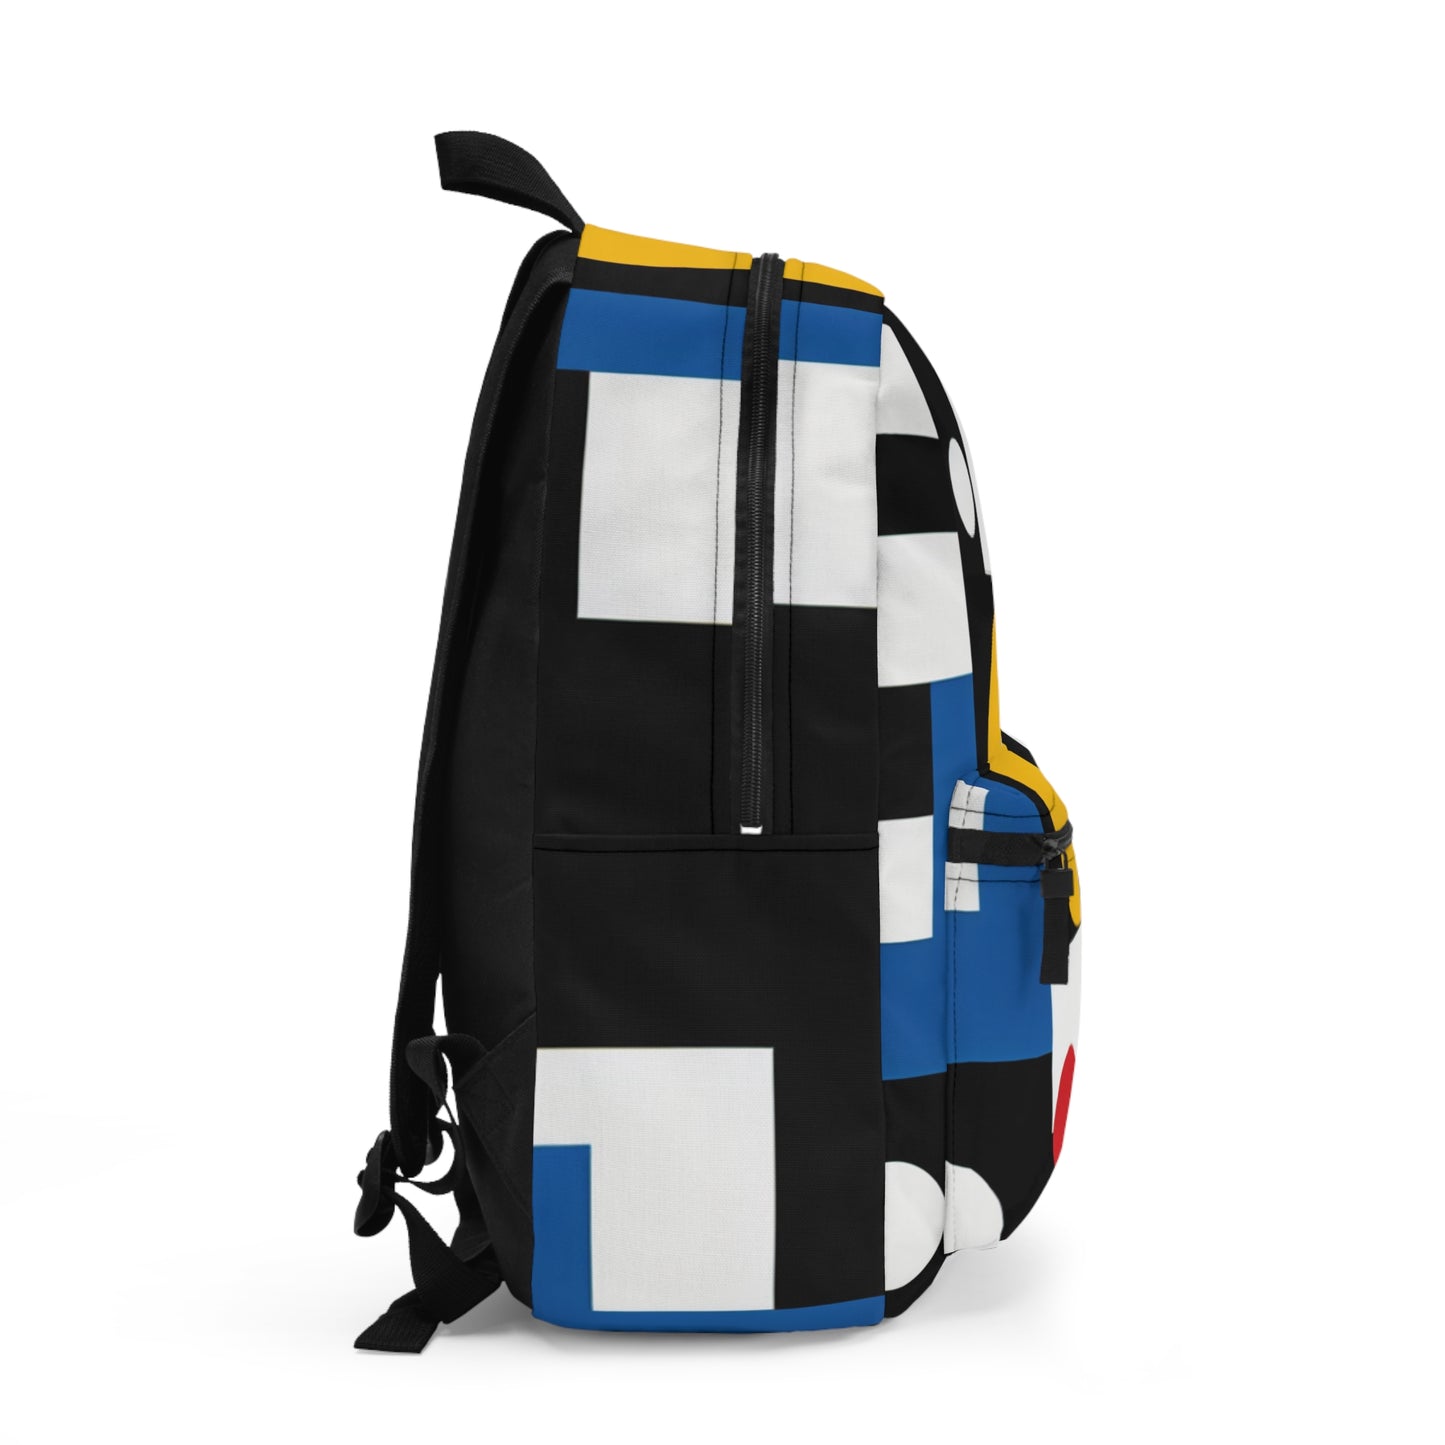 "Suprematic Harmony: Exploring Geometric Composition with Bold Colors" - The Alien Backpack Suprematism